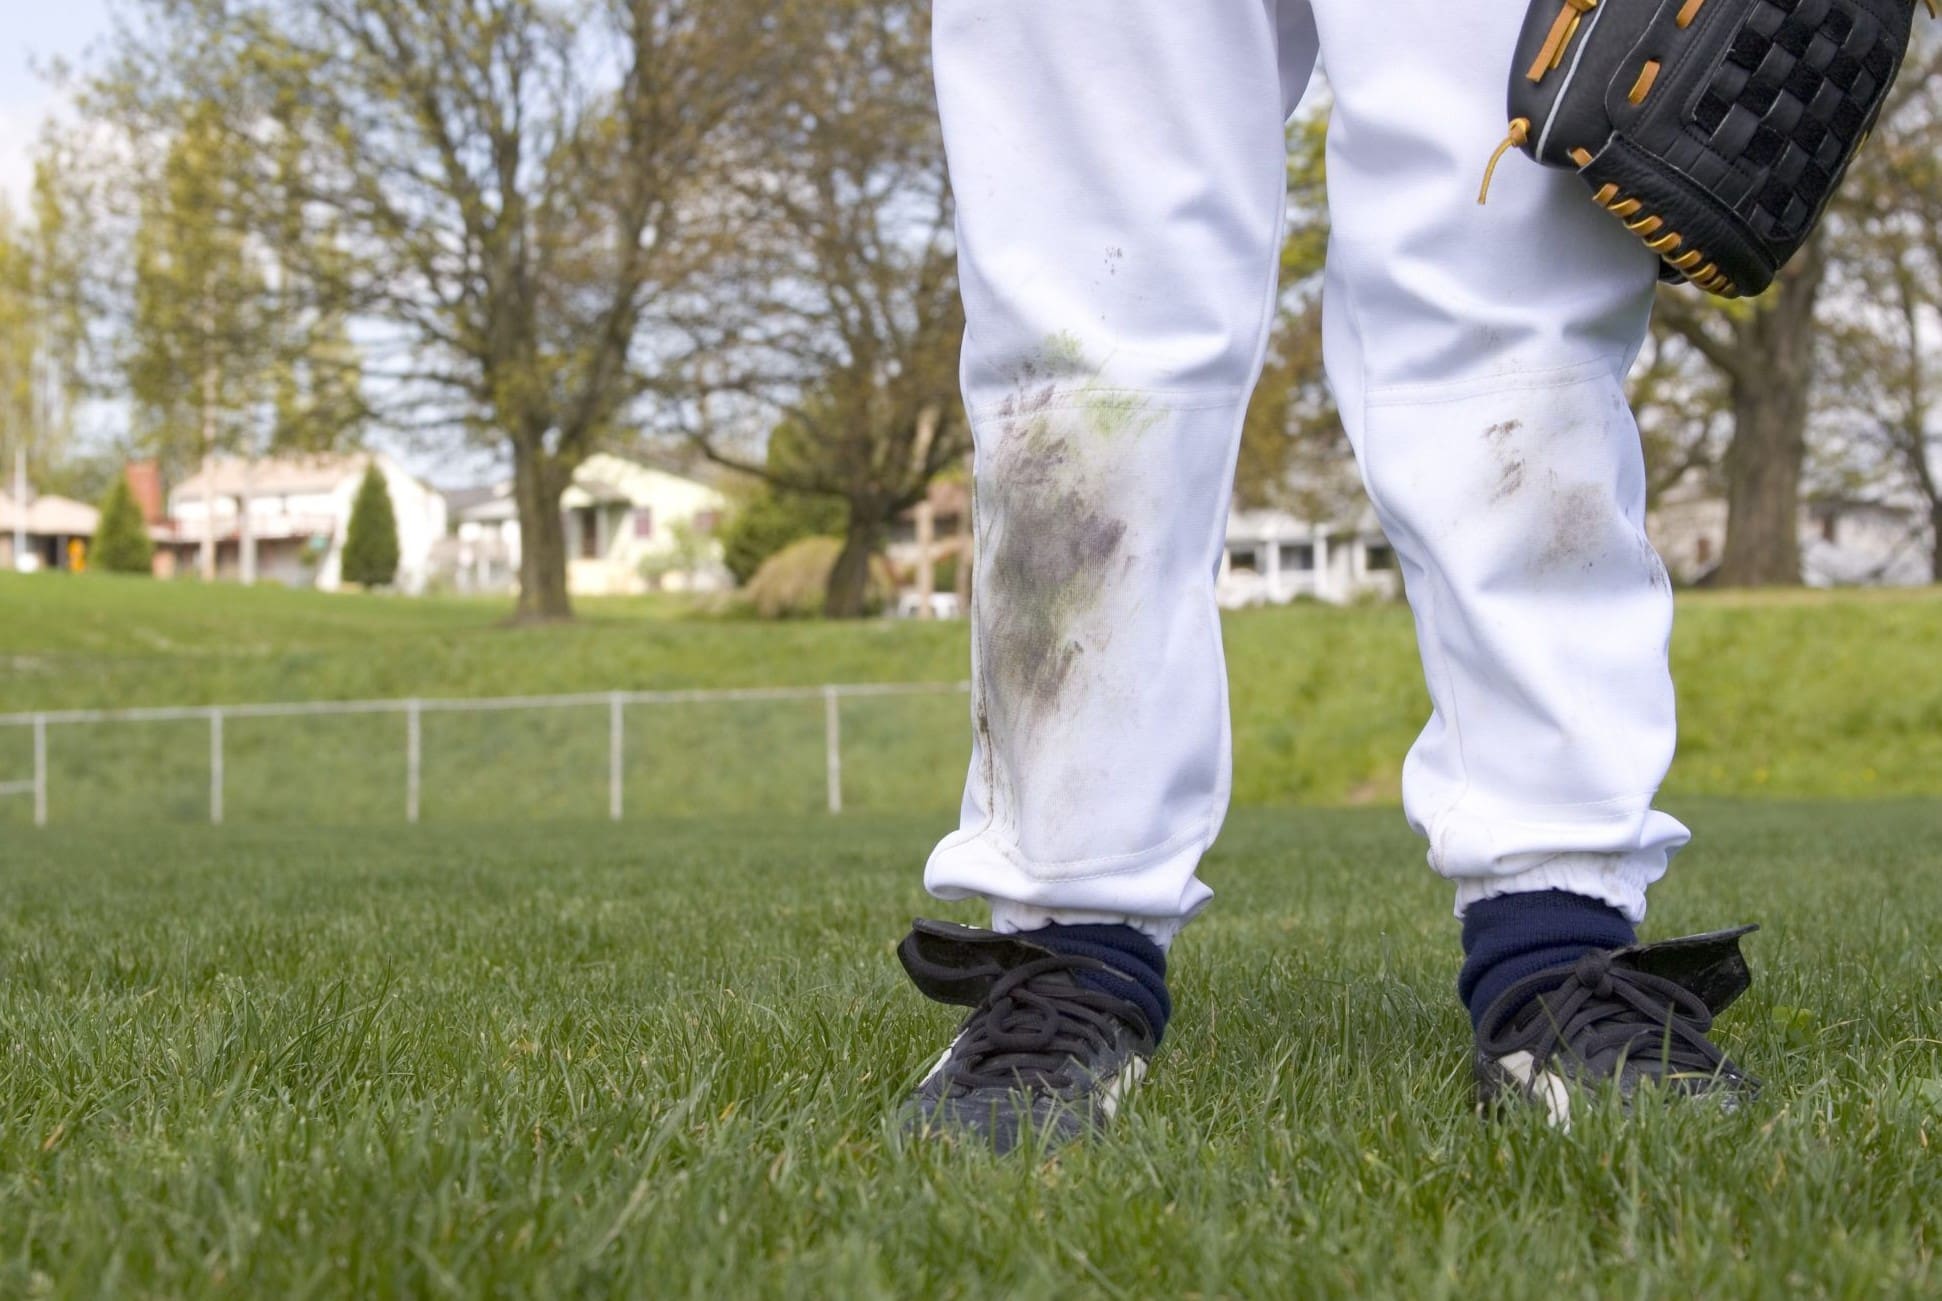 How To Get Grass And Dirt Stains Out Of Baseball Pants